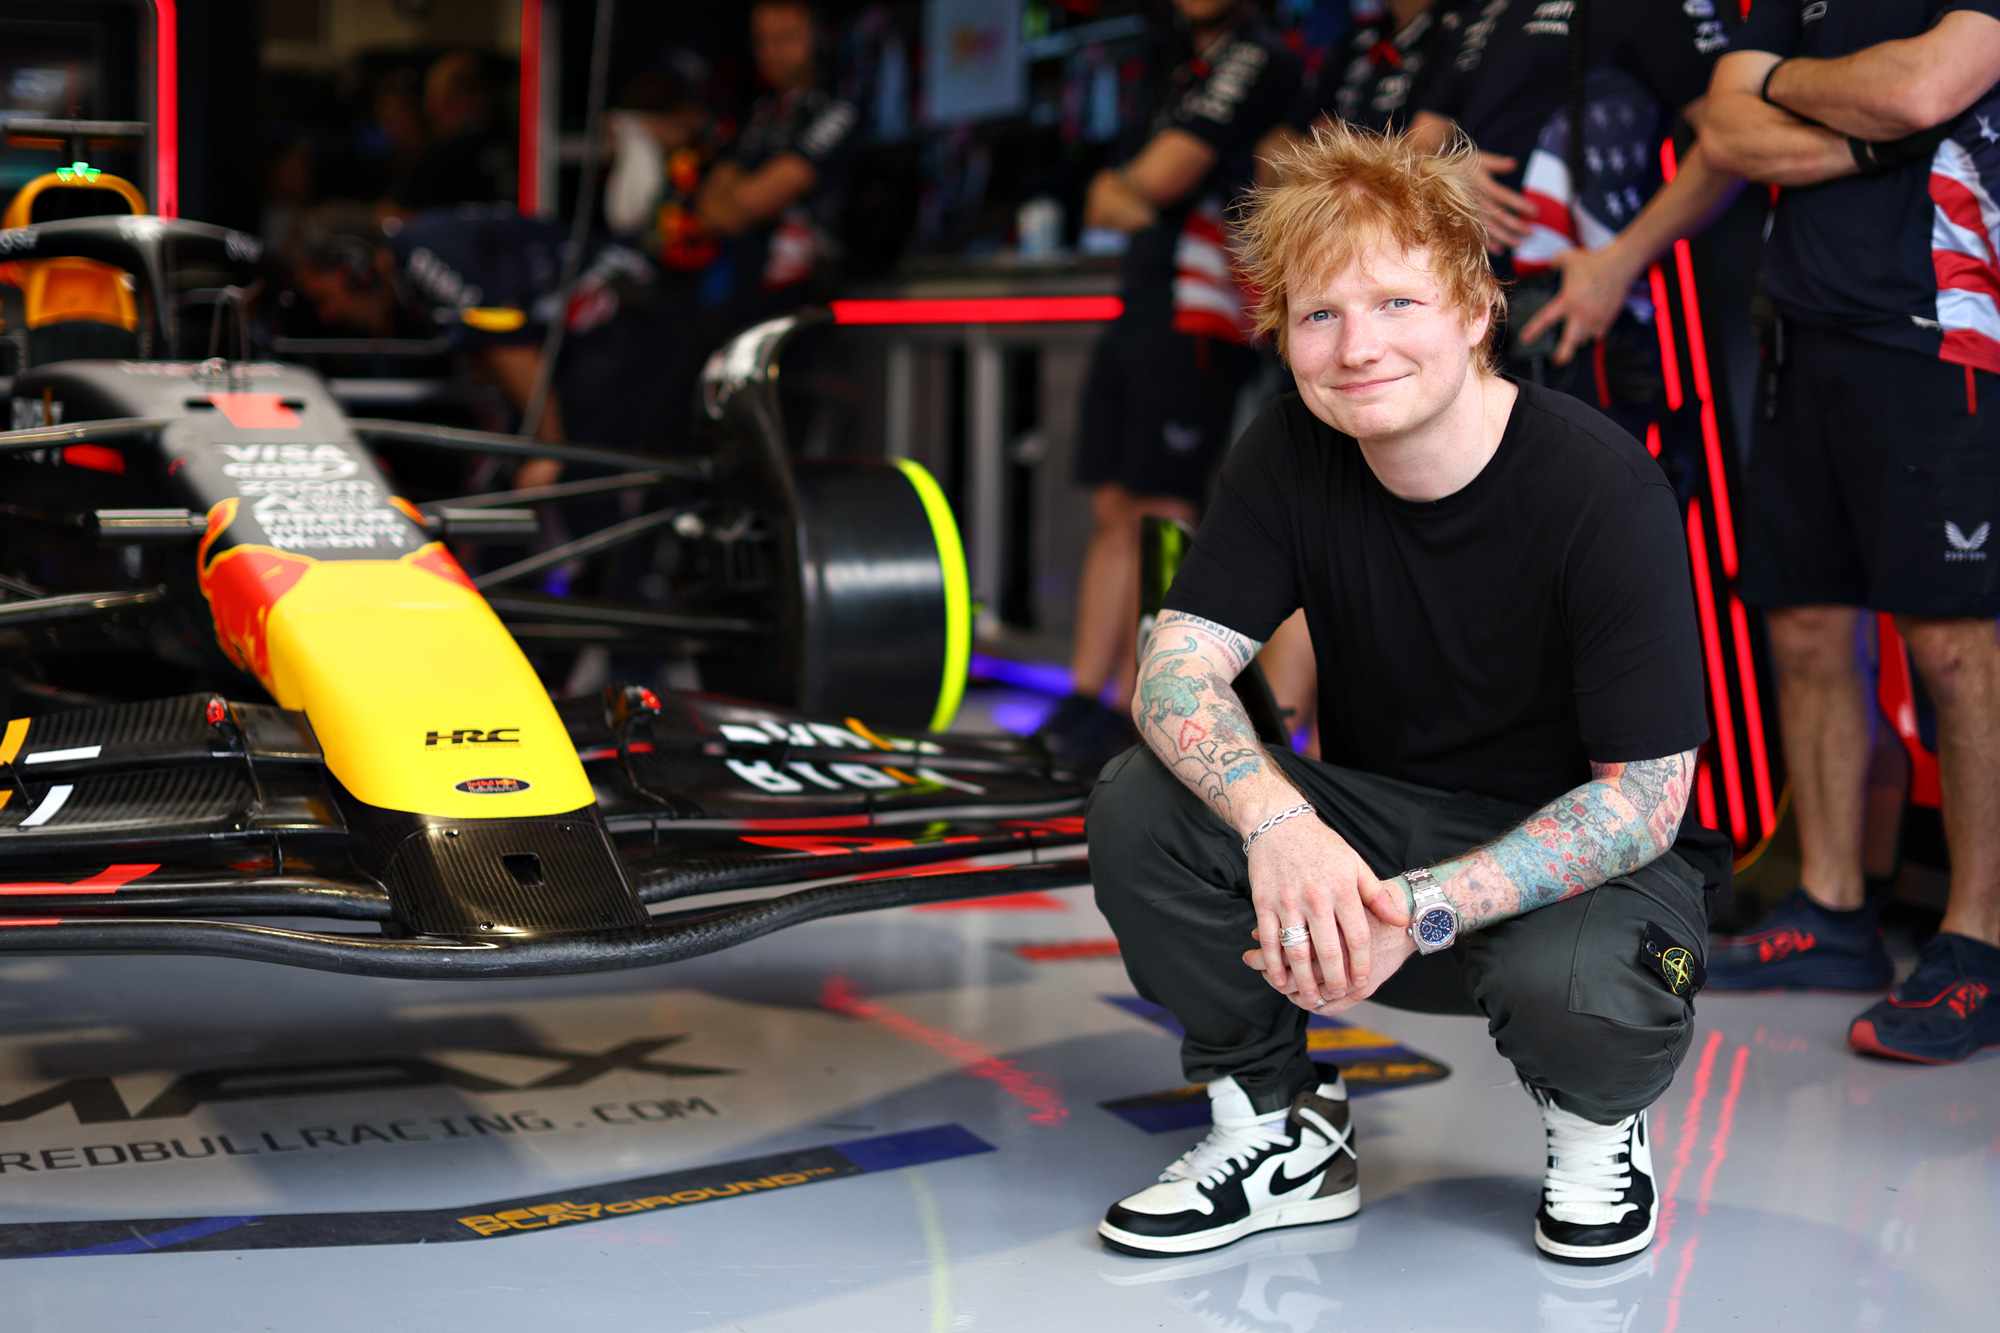 Ed Sheeran poses for a photo outside the Oracle Red Bull Racing garage prior to Sprint Qualifying ahead of the F1 